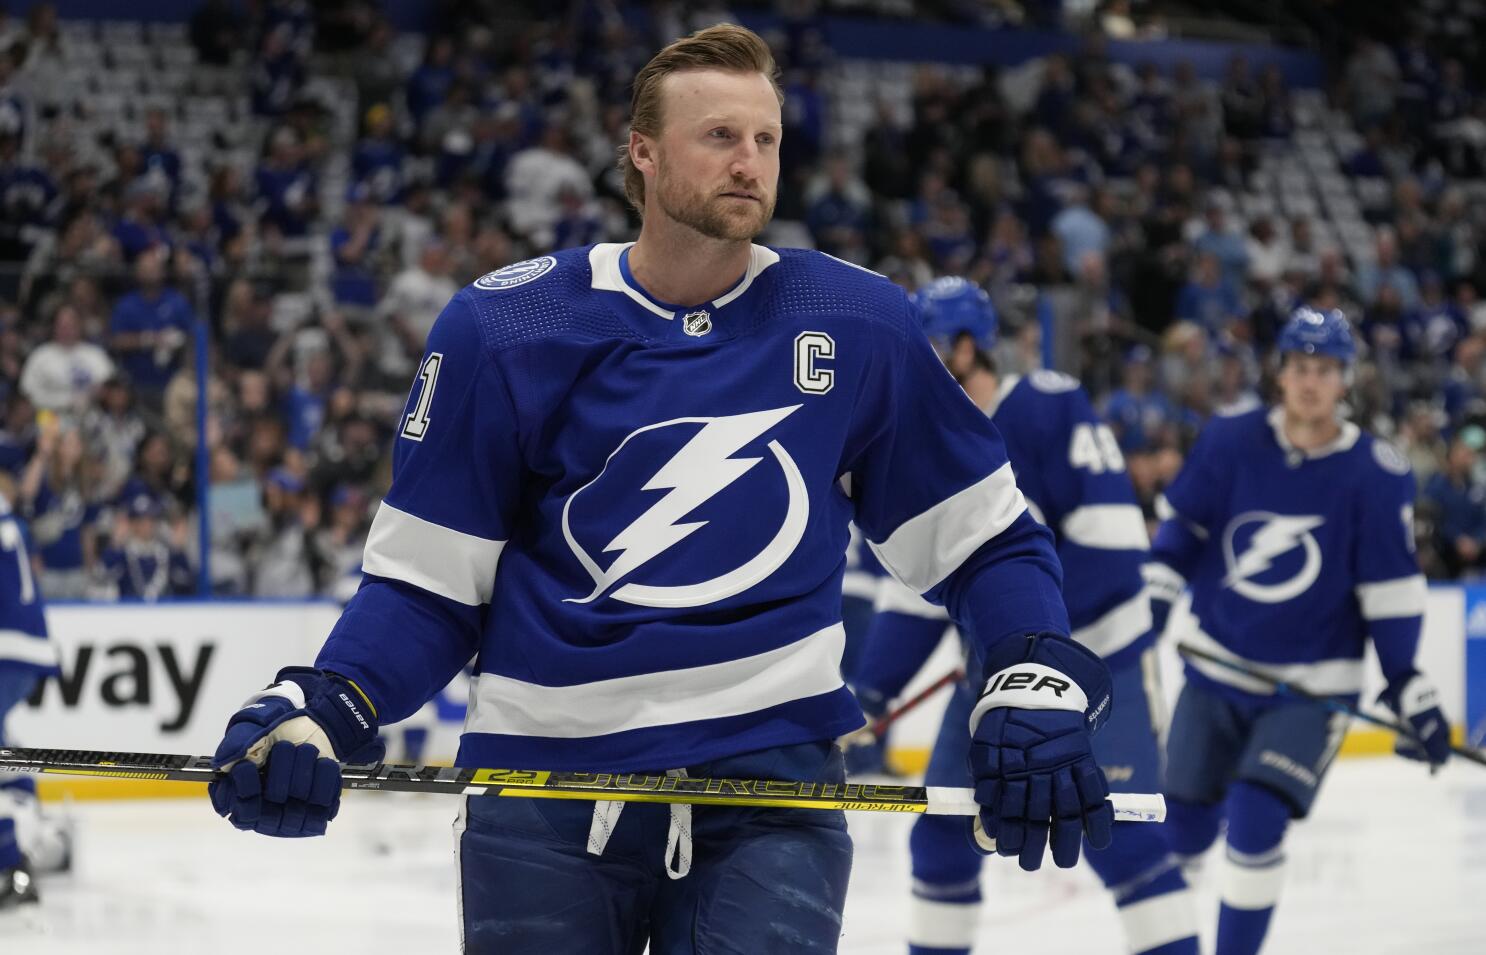 For both the Lightning and the Tampa Bay community, there was a